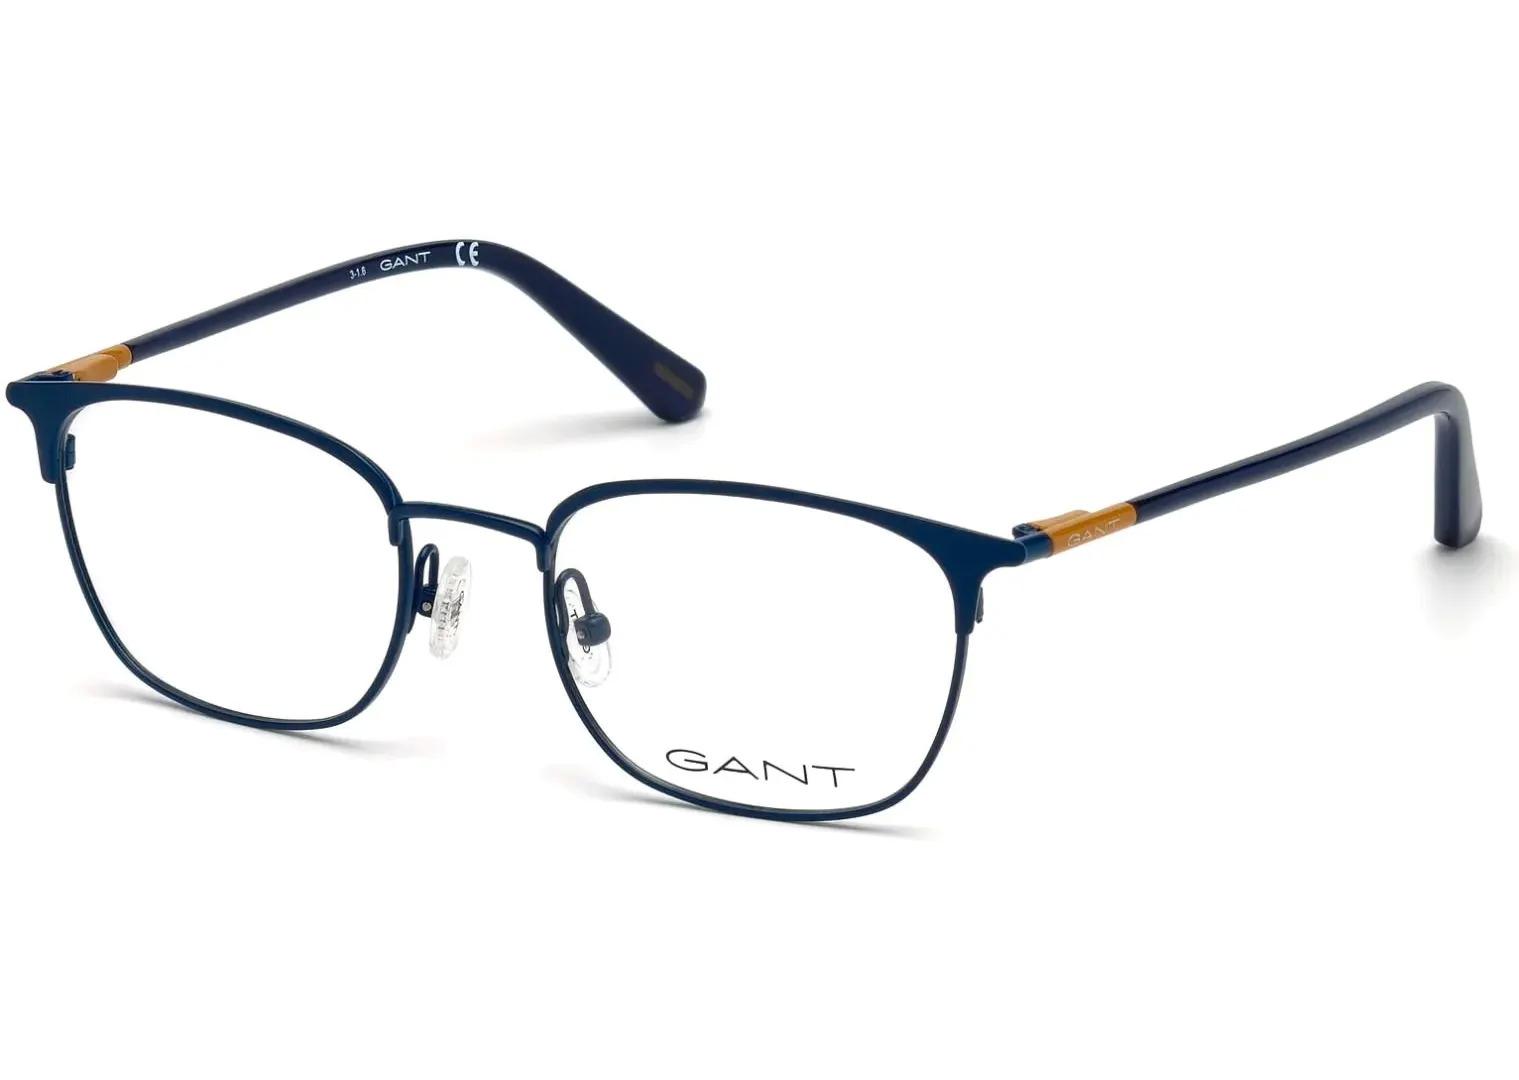 Guess and Kenneth Cole Eyeglass Frames for $13.99